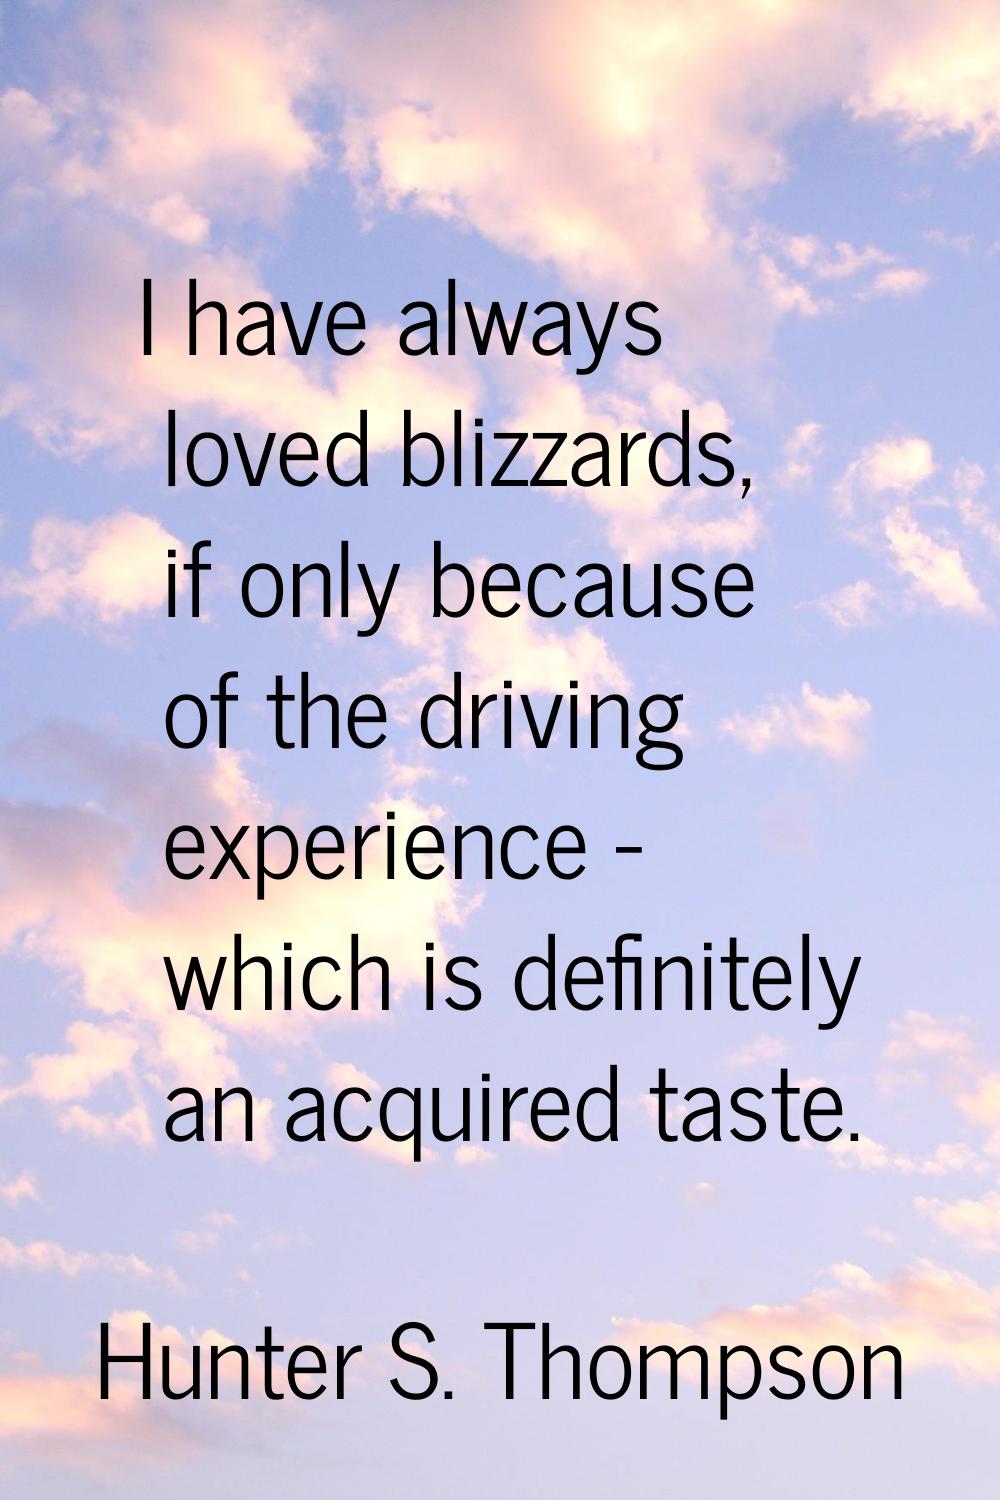 I have always loved blizzards, if only because of the driving experience - which is definitely an a